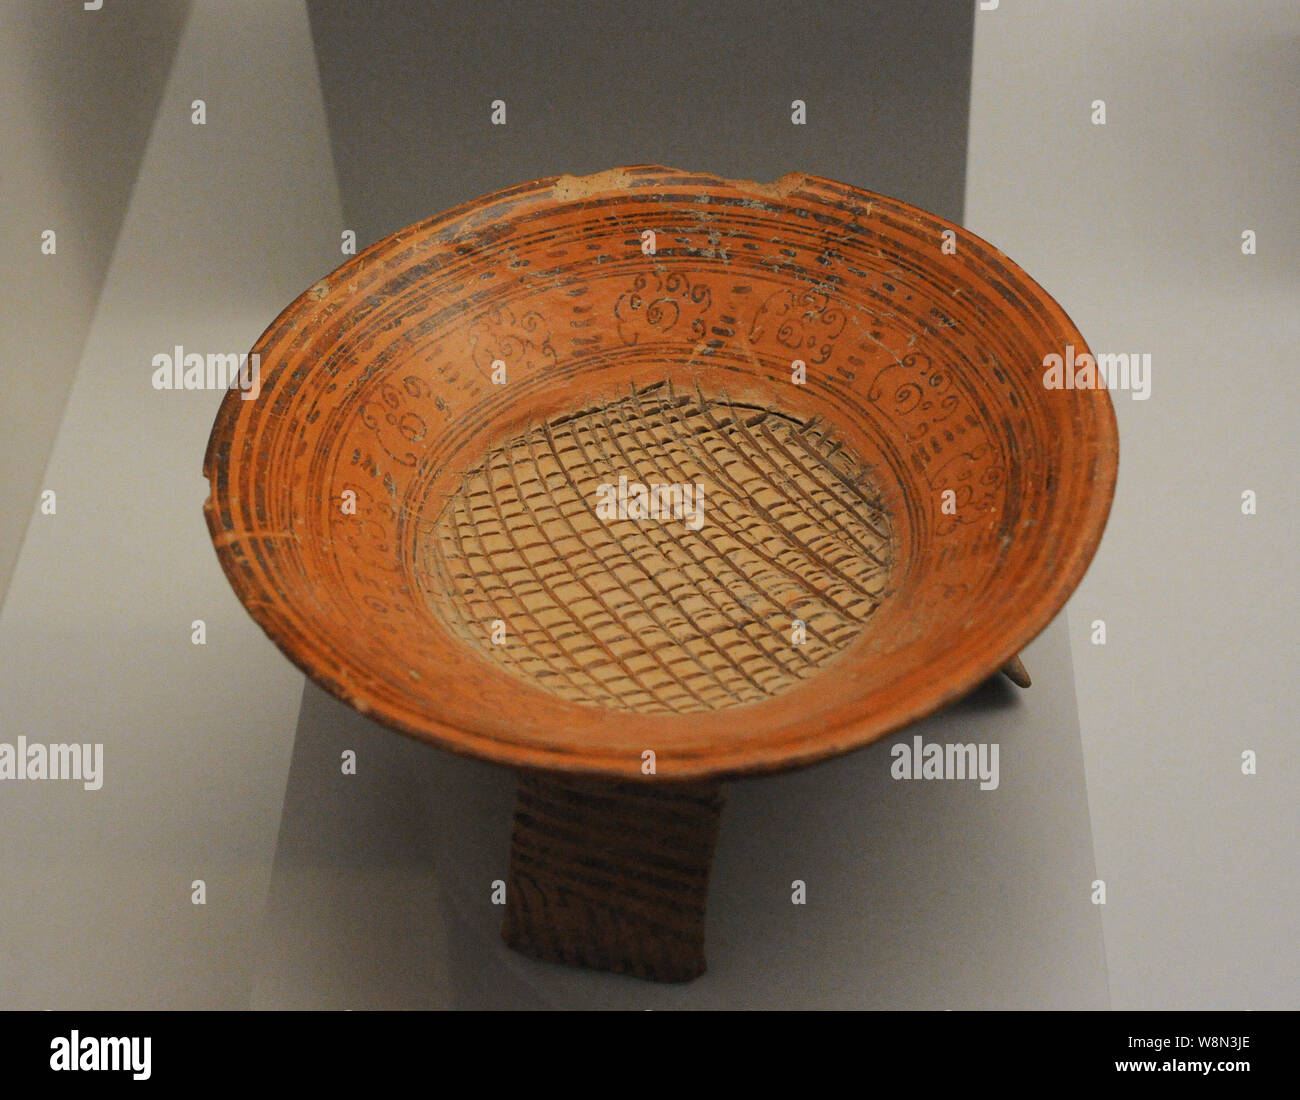 Tripod plate. Painted ceramics. Aztec culture. Tlatelolco Phase. Late Postclassic Perid (1250-1520 AD). Central Mexico. Museum of the Americas. Madrid, Spain. Stock Photo